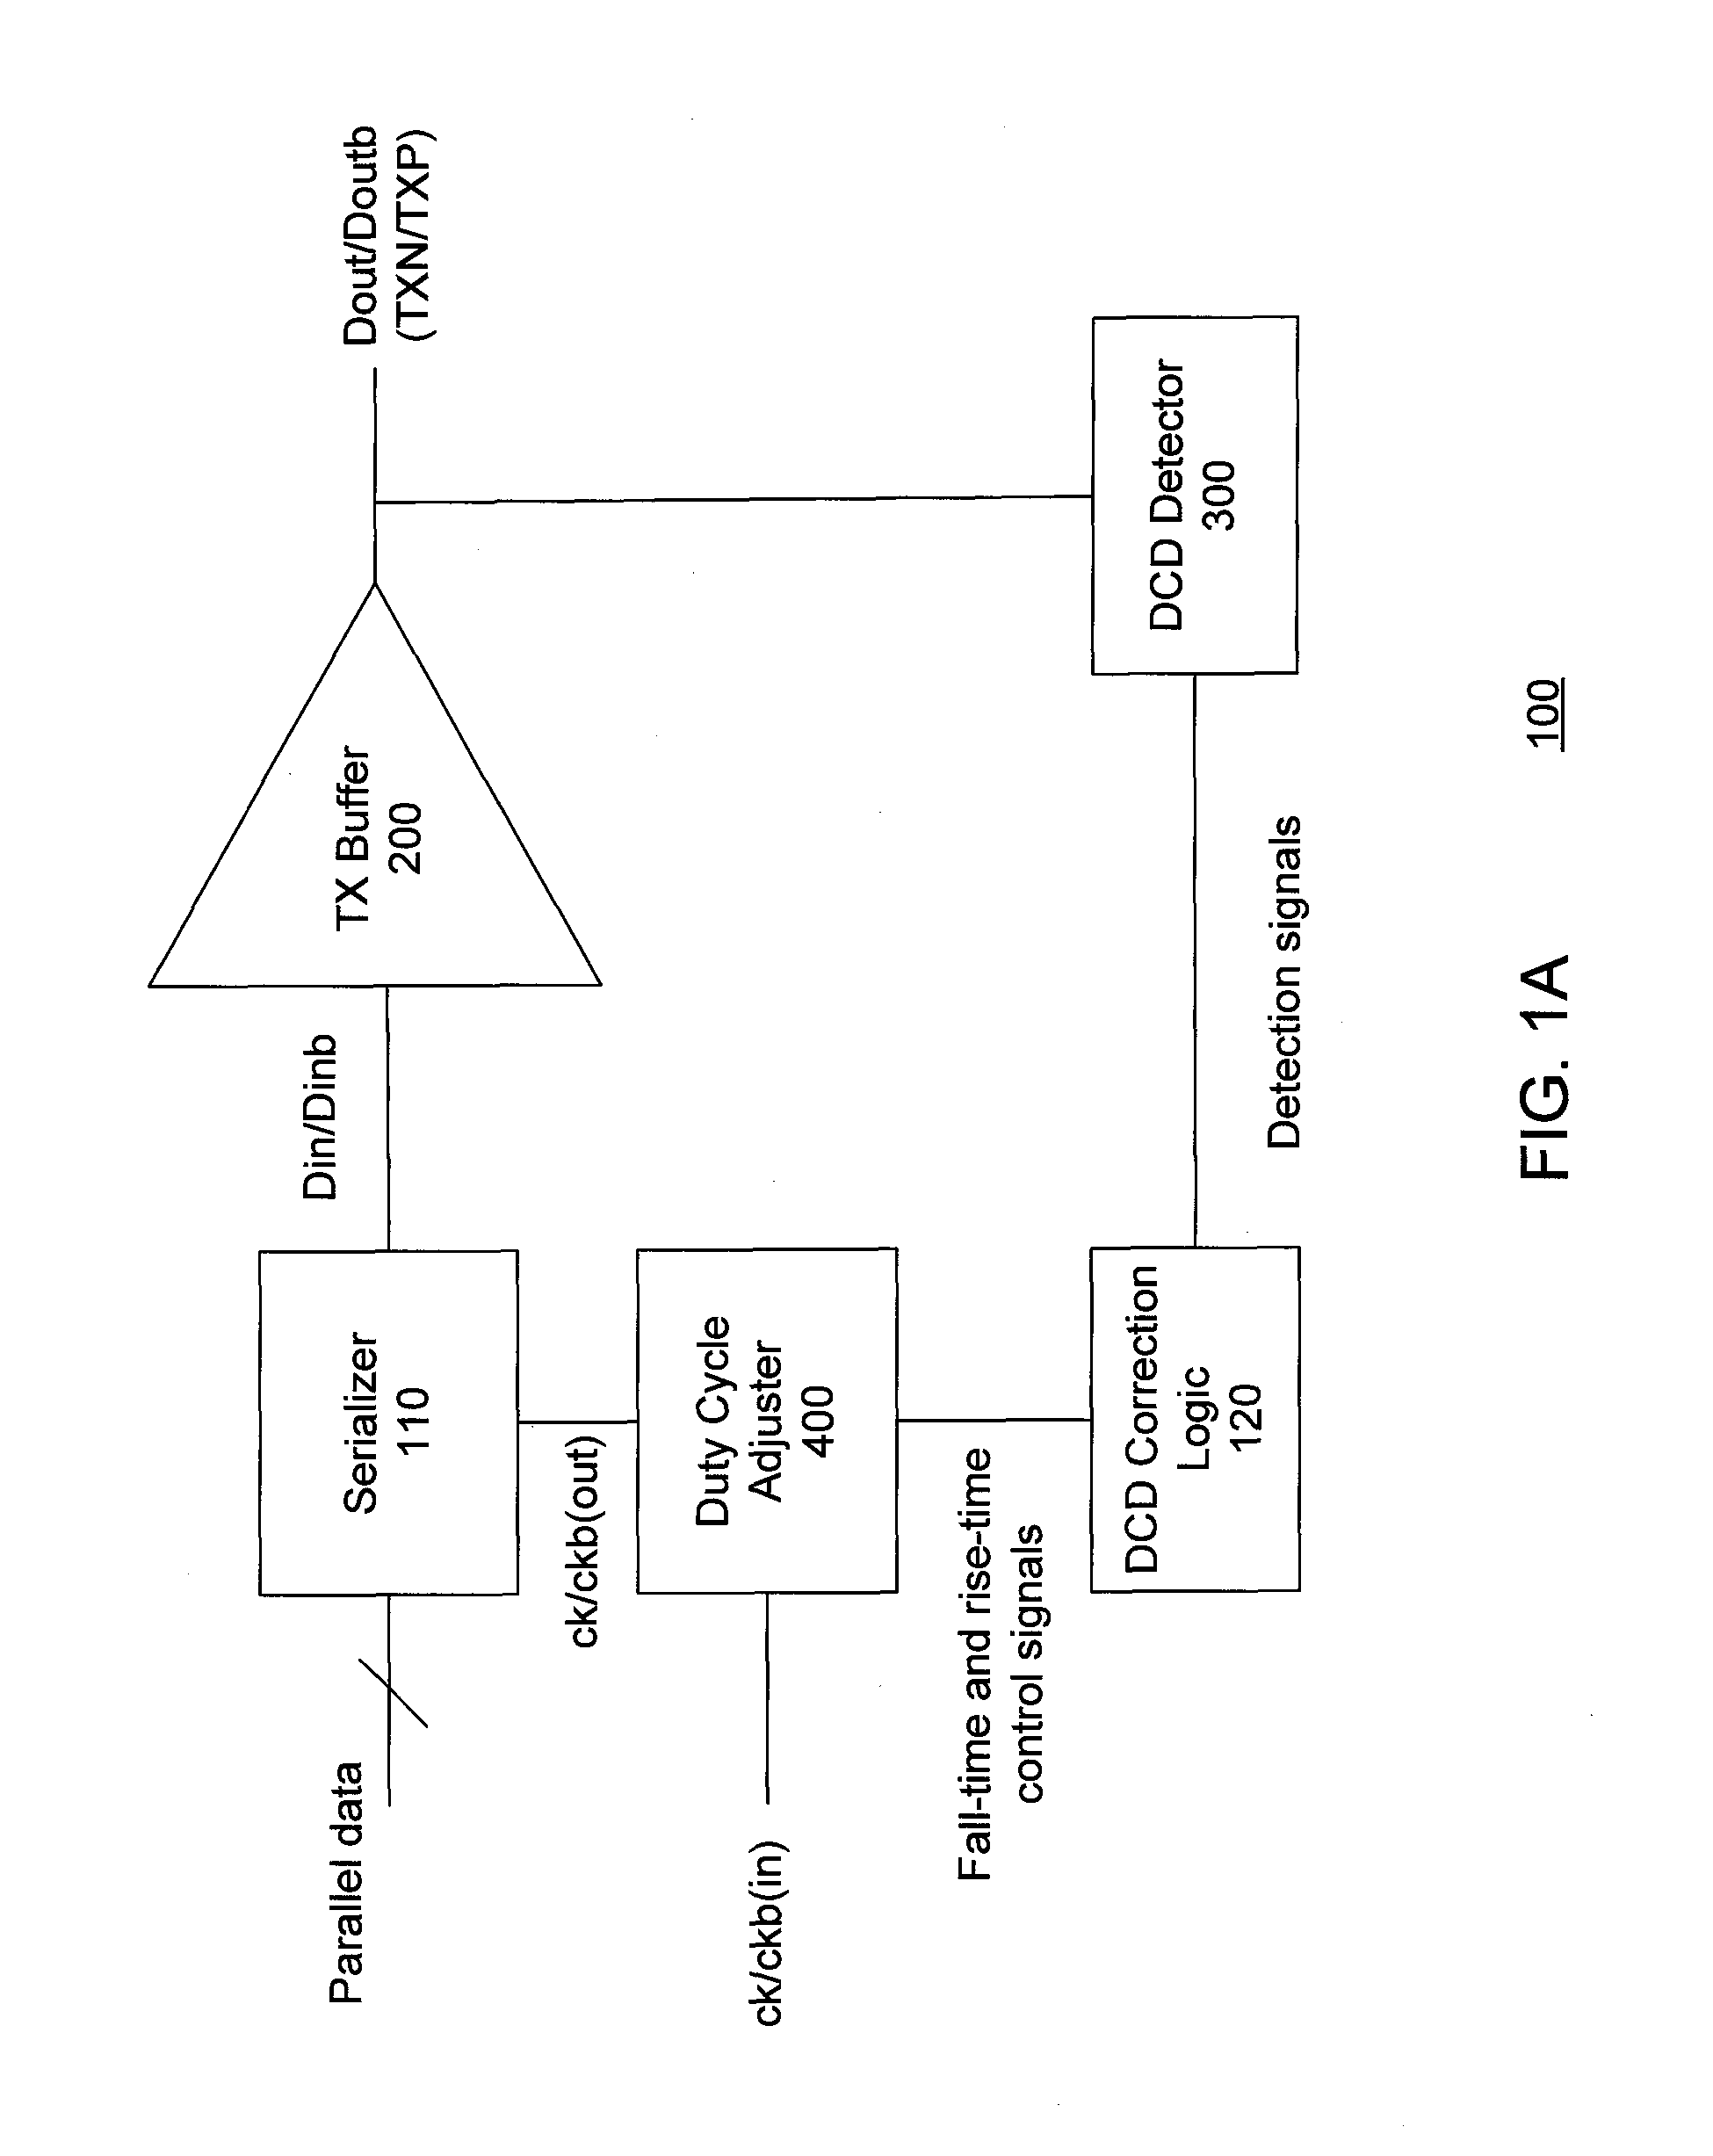 Apparatus and methods for detection and correction of transmitter duty cycle distortion